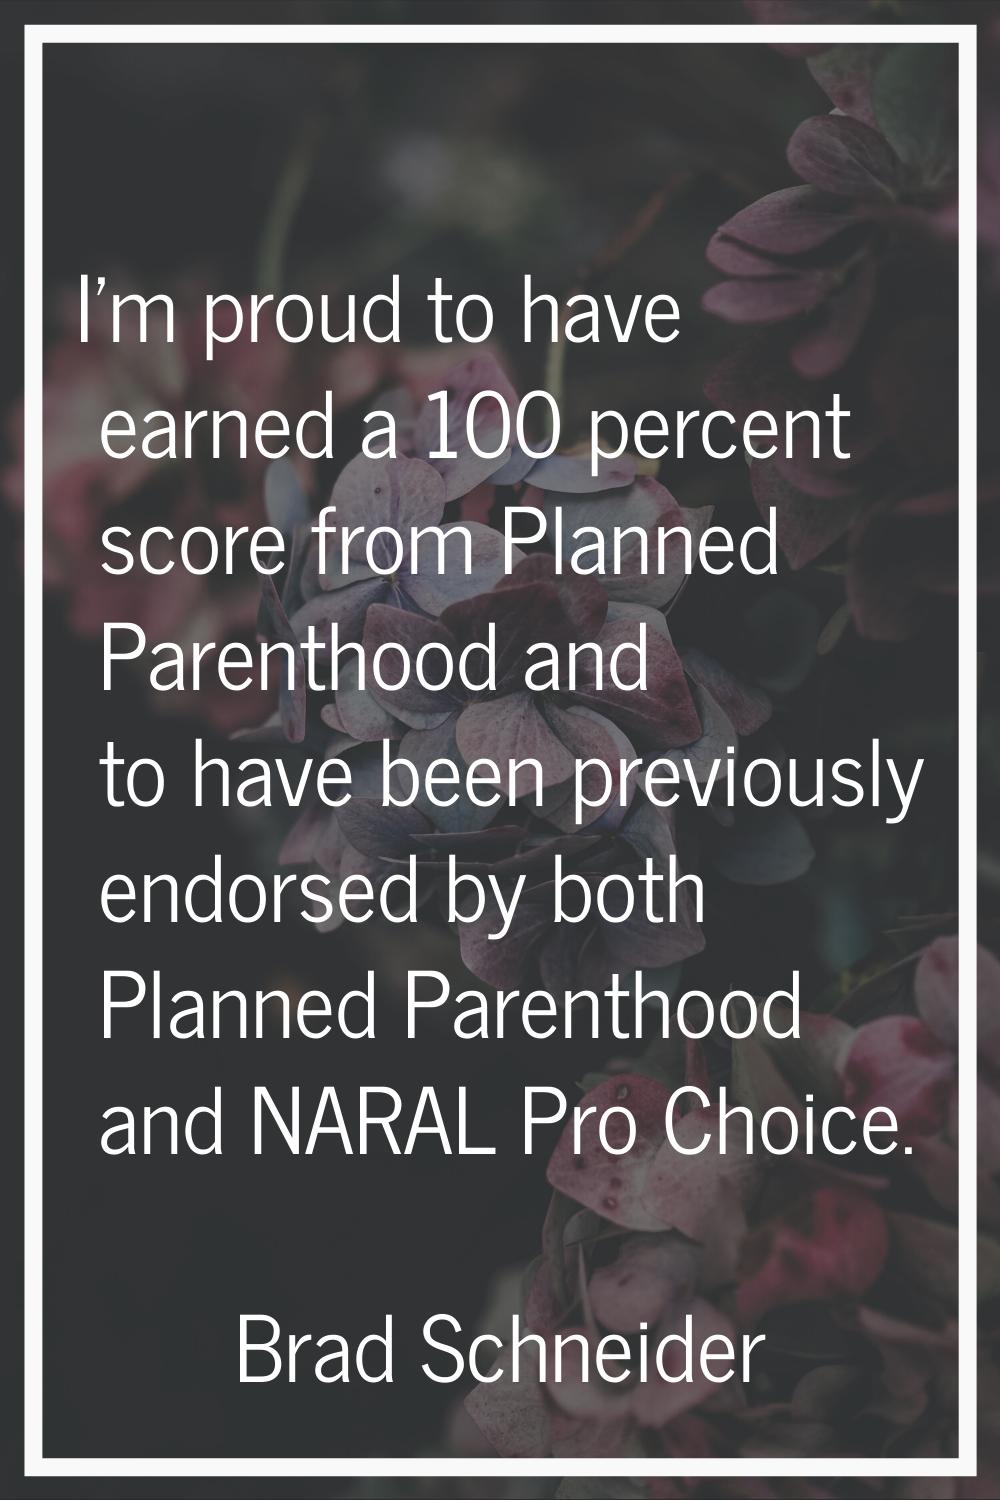 I'm proud to have earned a 100 percent score from Planned Parenthood and to have been previously en